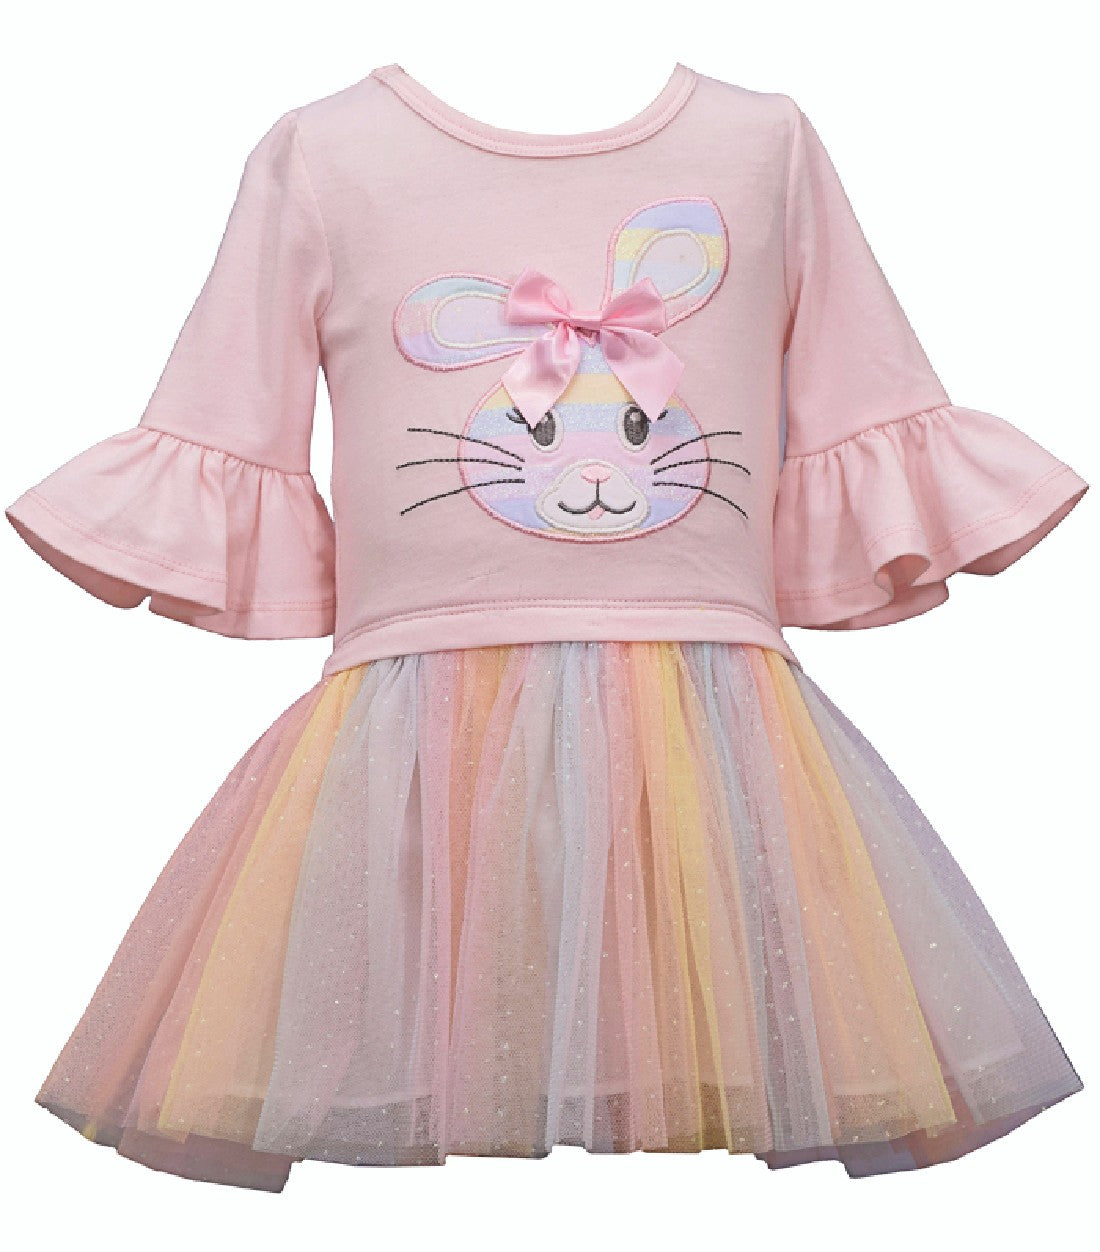 THE SWEETEST BABY GIRL EASTER DRESSES & BOYS OUTFITS THIS SPRING